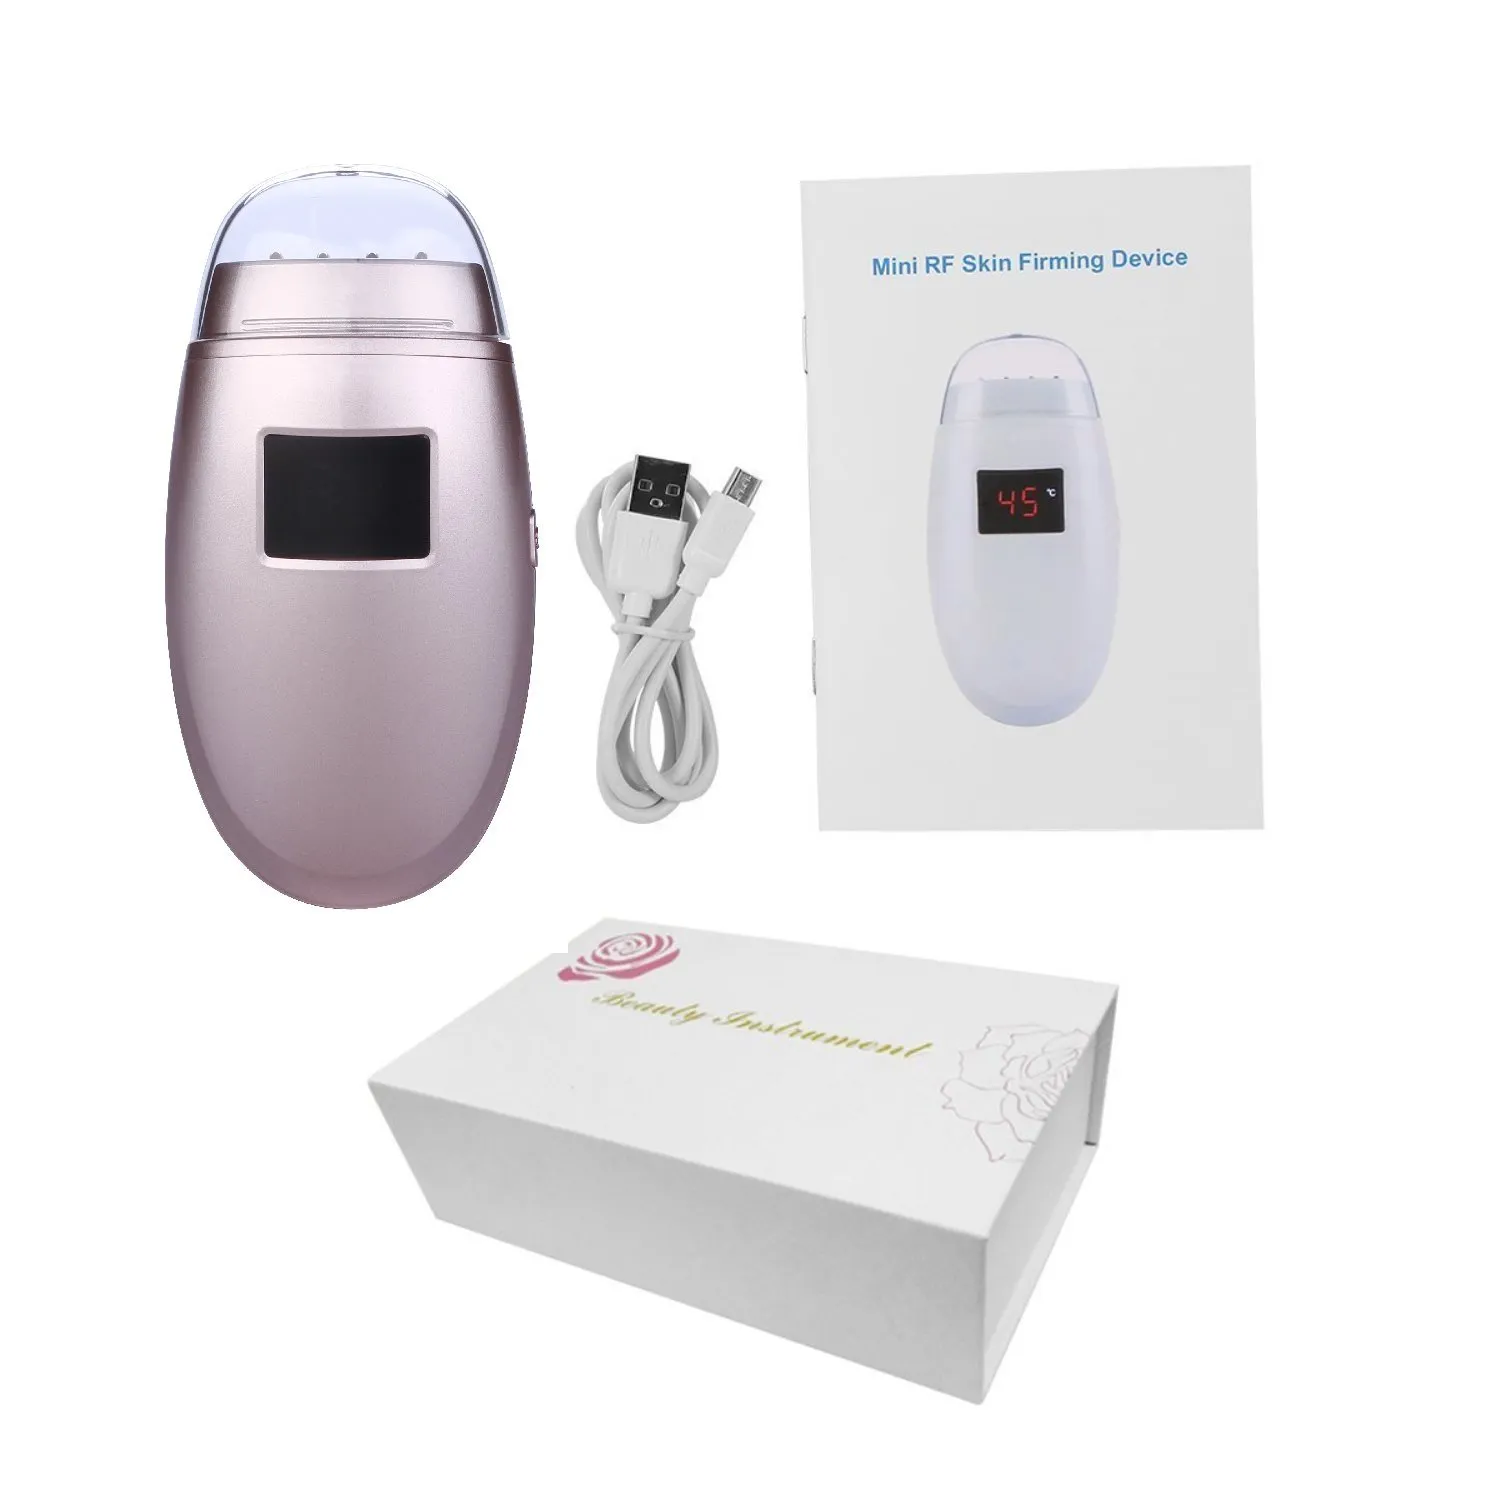 RF Radio Frequency Facial Spa Machine Wrinkle Removal Skin Face Rejuvenation Tightening Beauty Care Device Lifting &Anti-Aging & Whitening